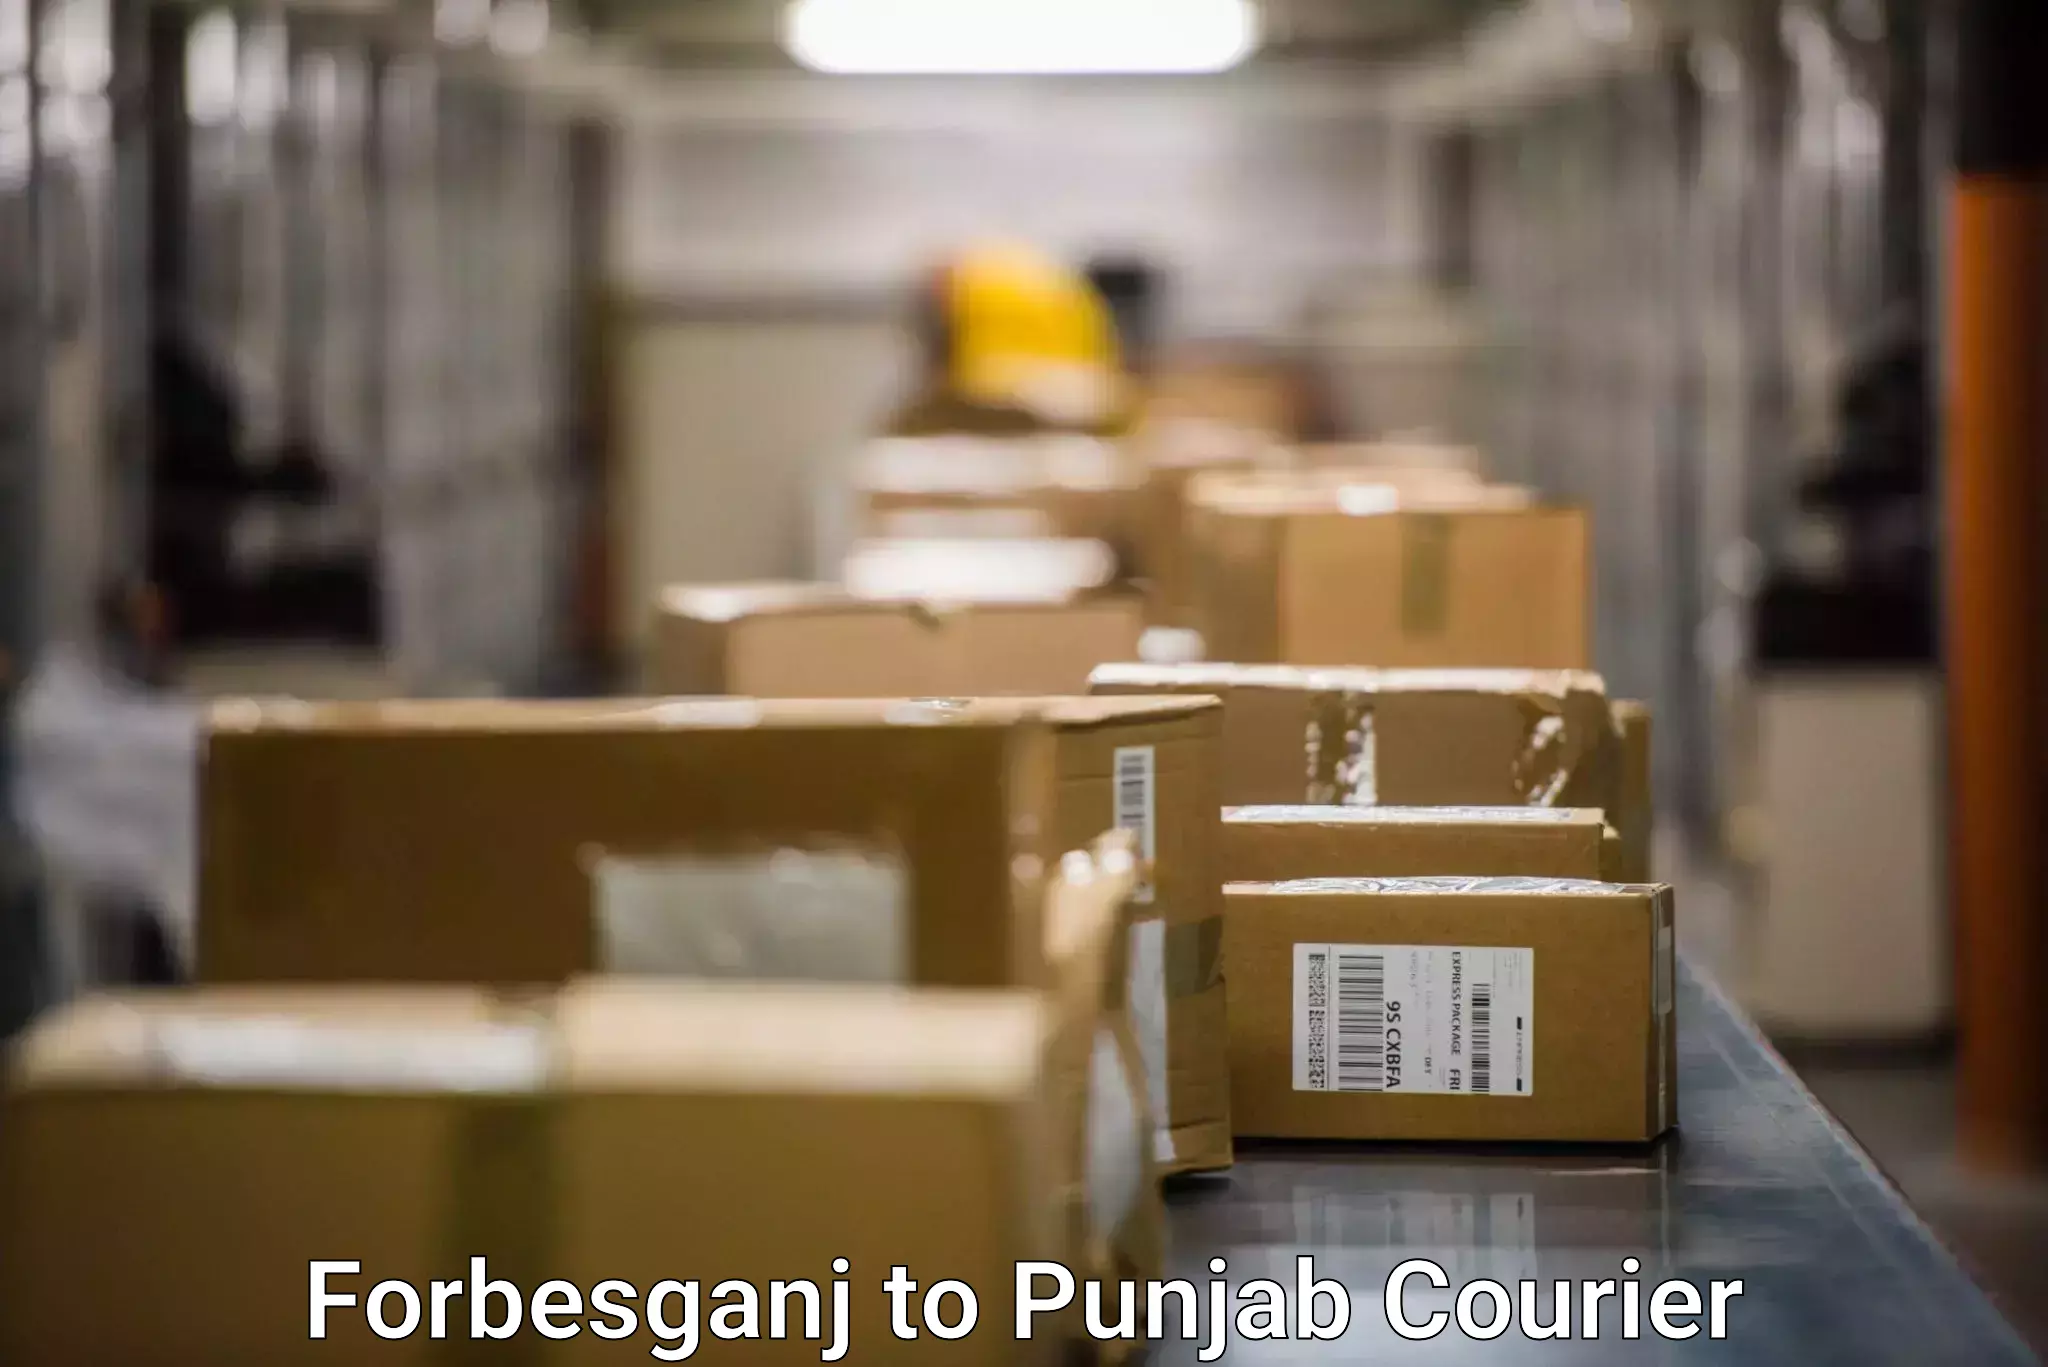 24-hour courier service Forbesganj to Mohali